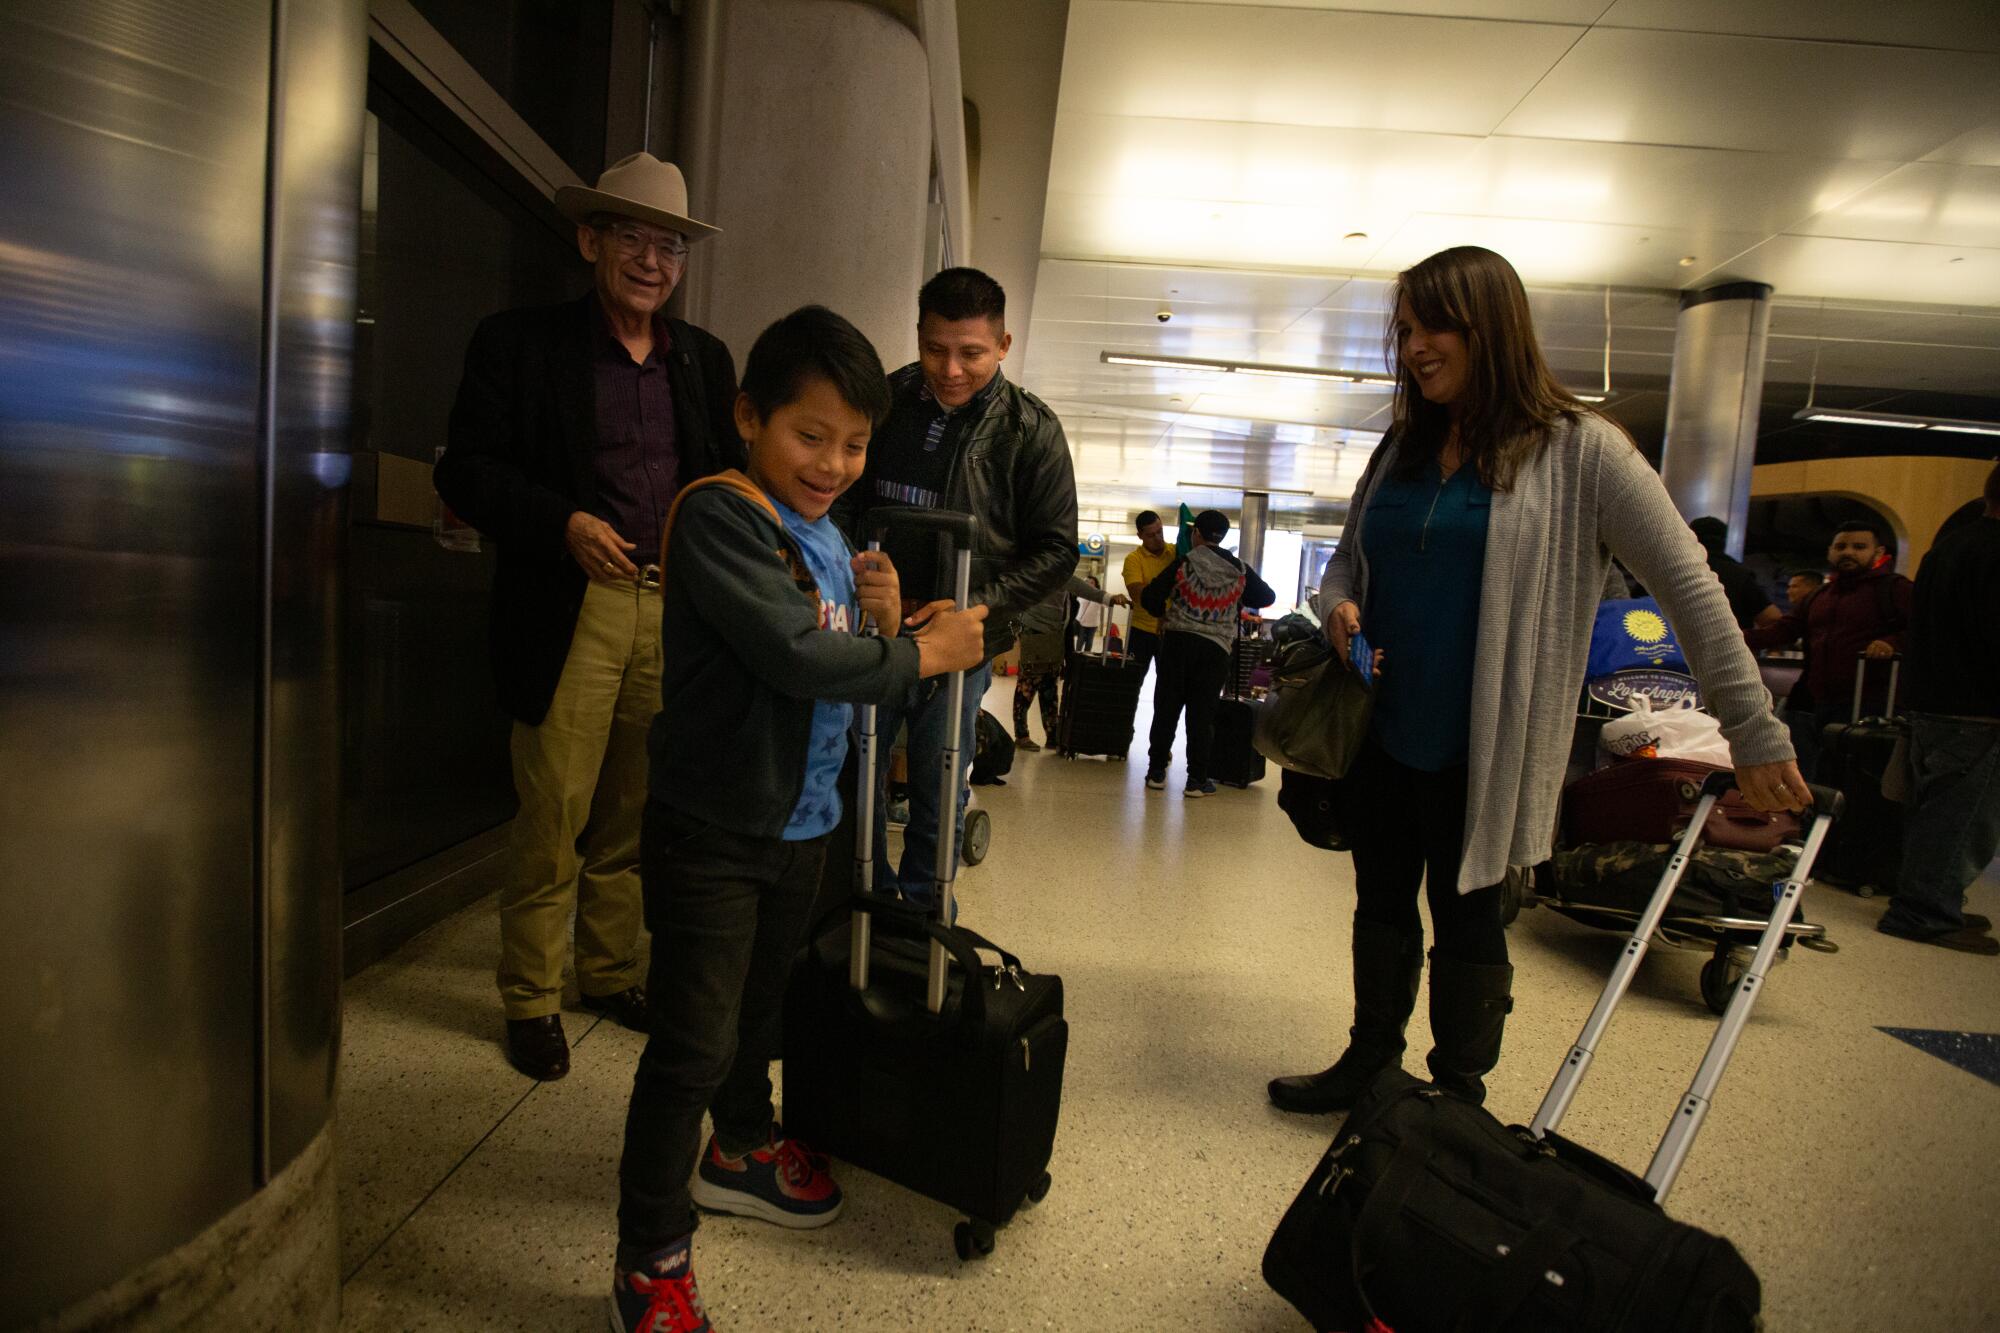 Byron Xol, 9, helps his dad David Xol with his luggage upon his return to the U.S.